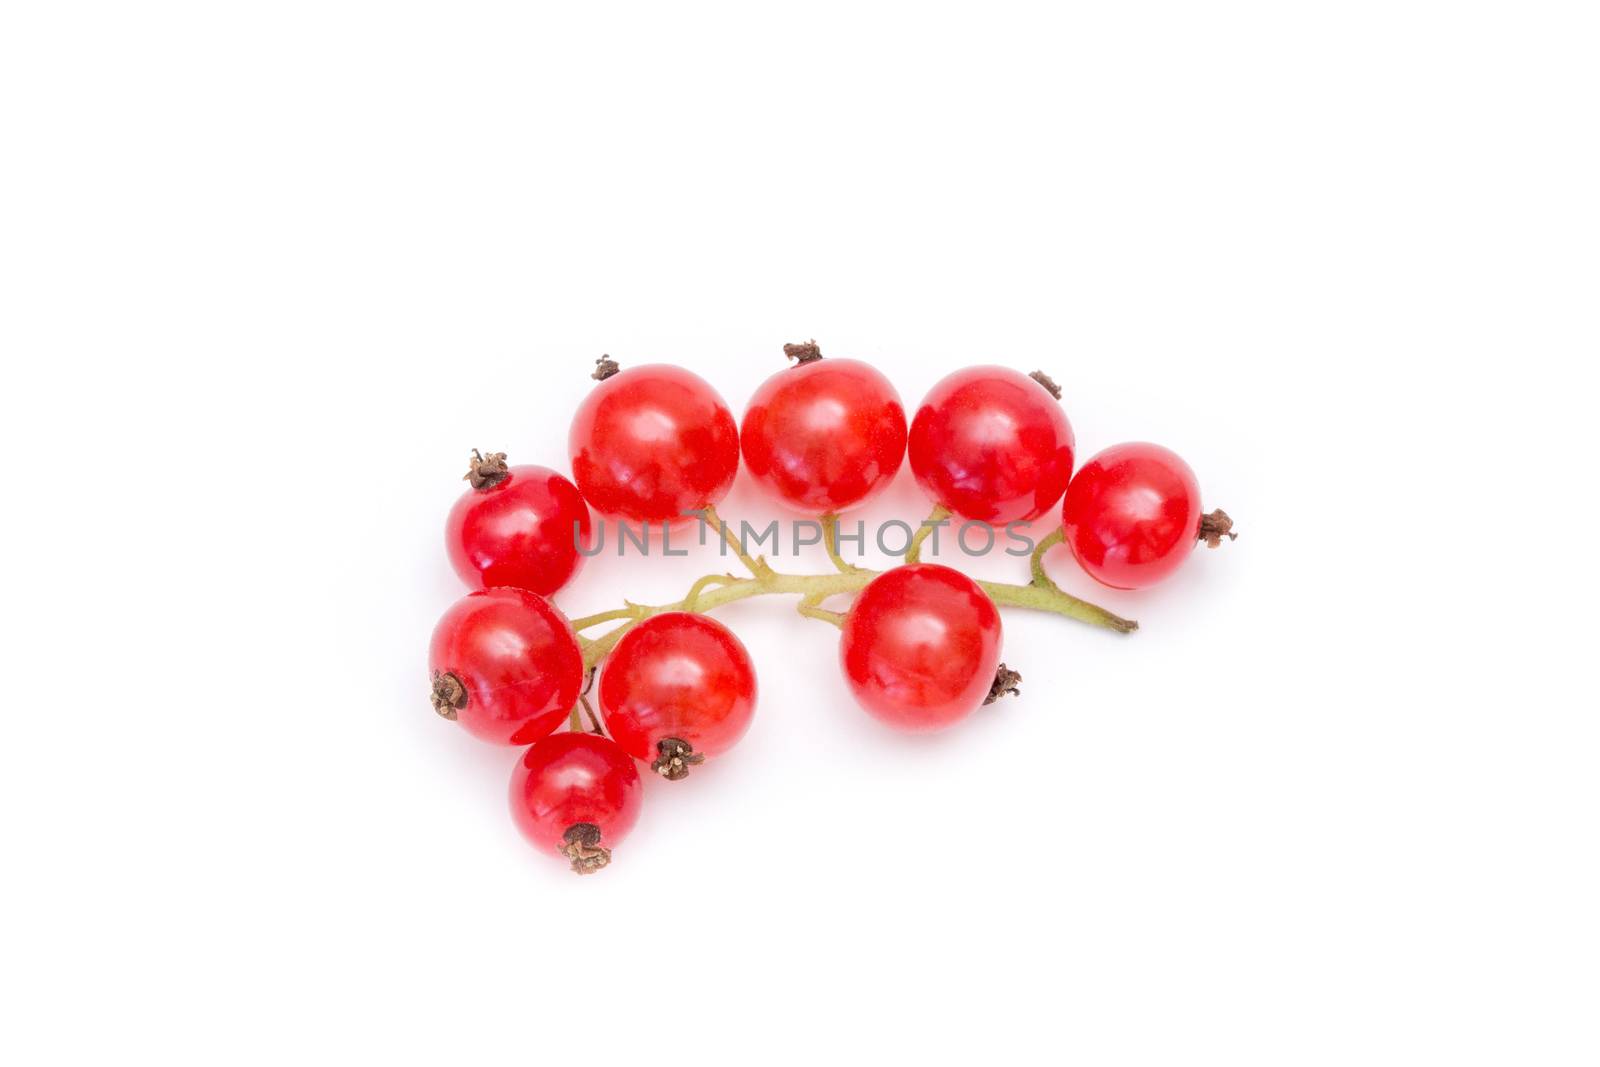 Red currant closeup isolated on white background by primipil